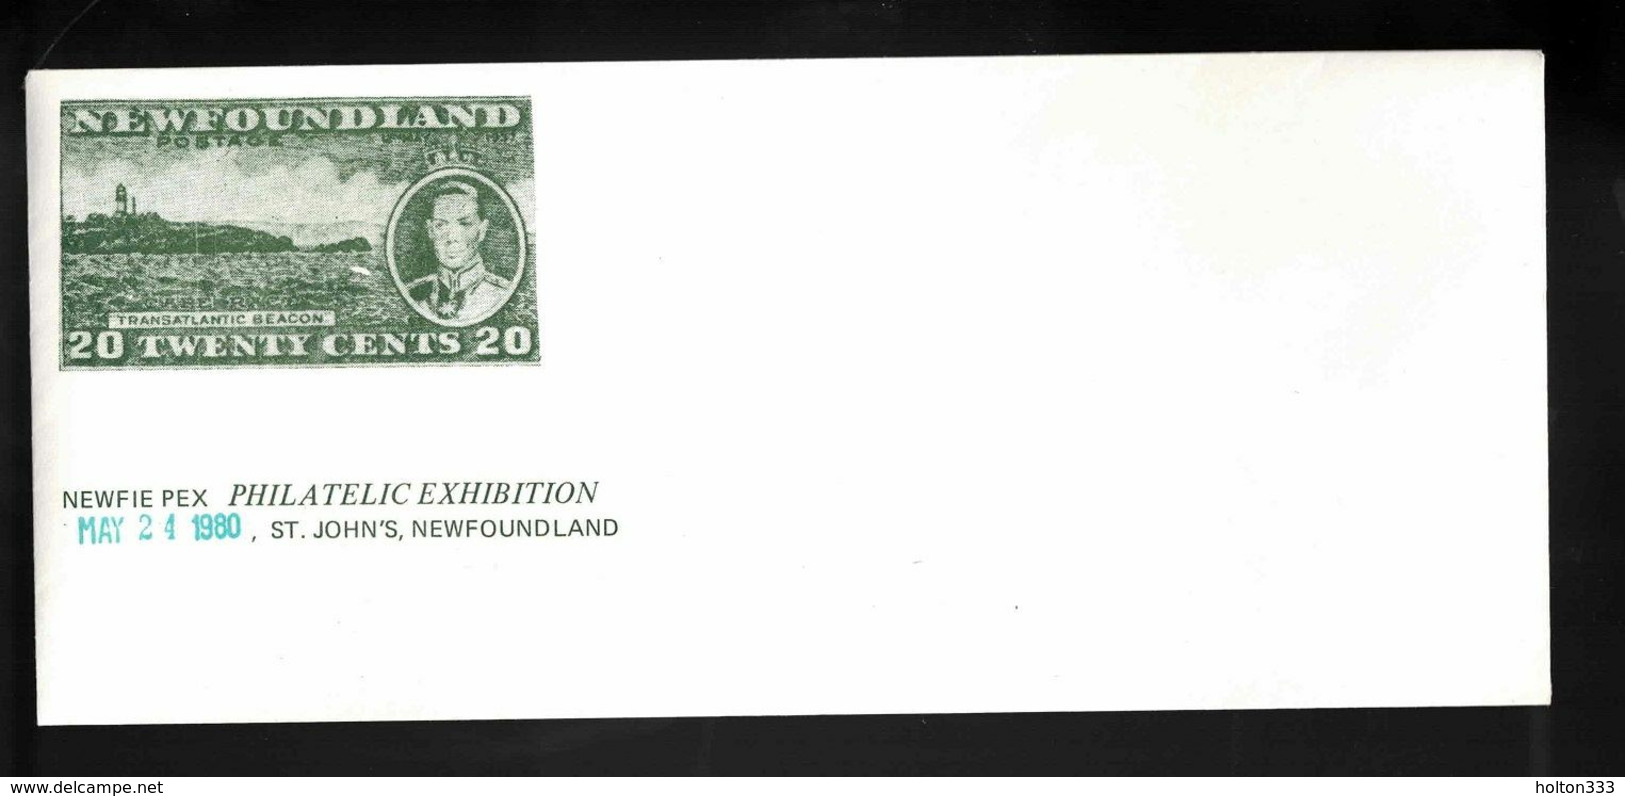 NEWFOUNDLAND Cover Blank - Two Newfie Pex Exhibition May 1980 - Commemorativi